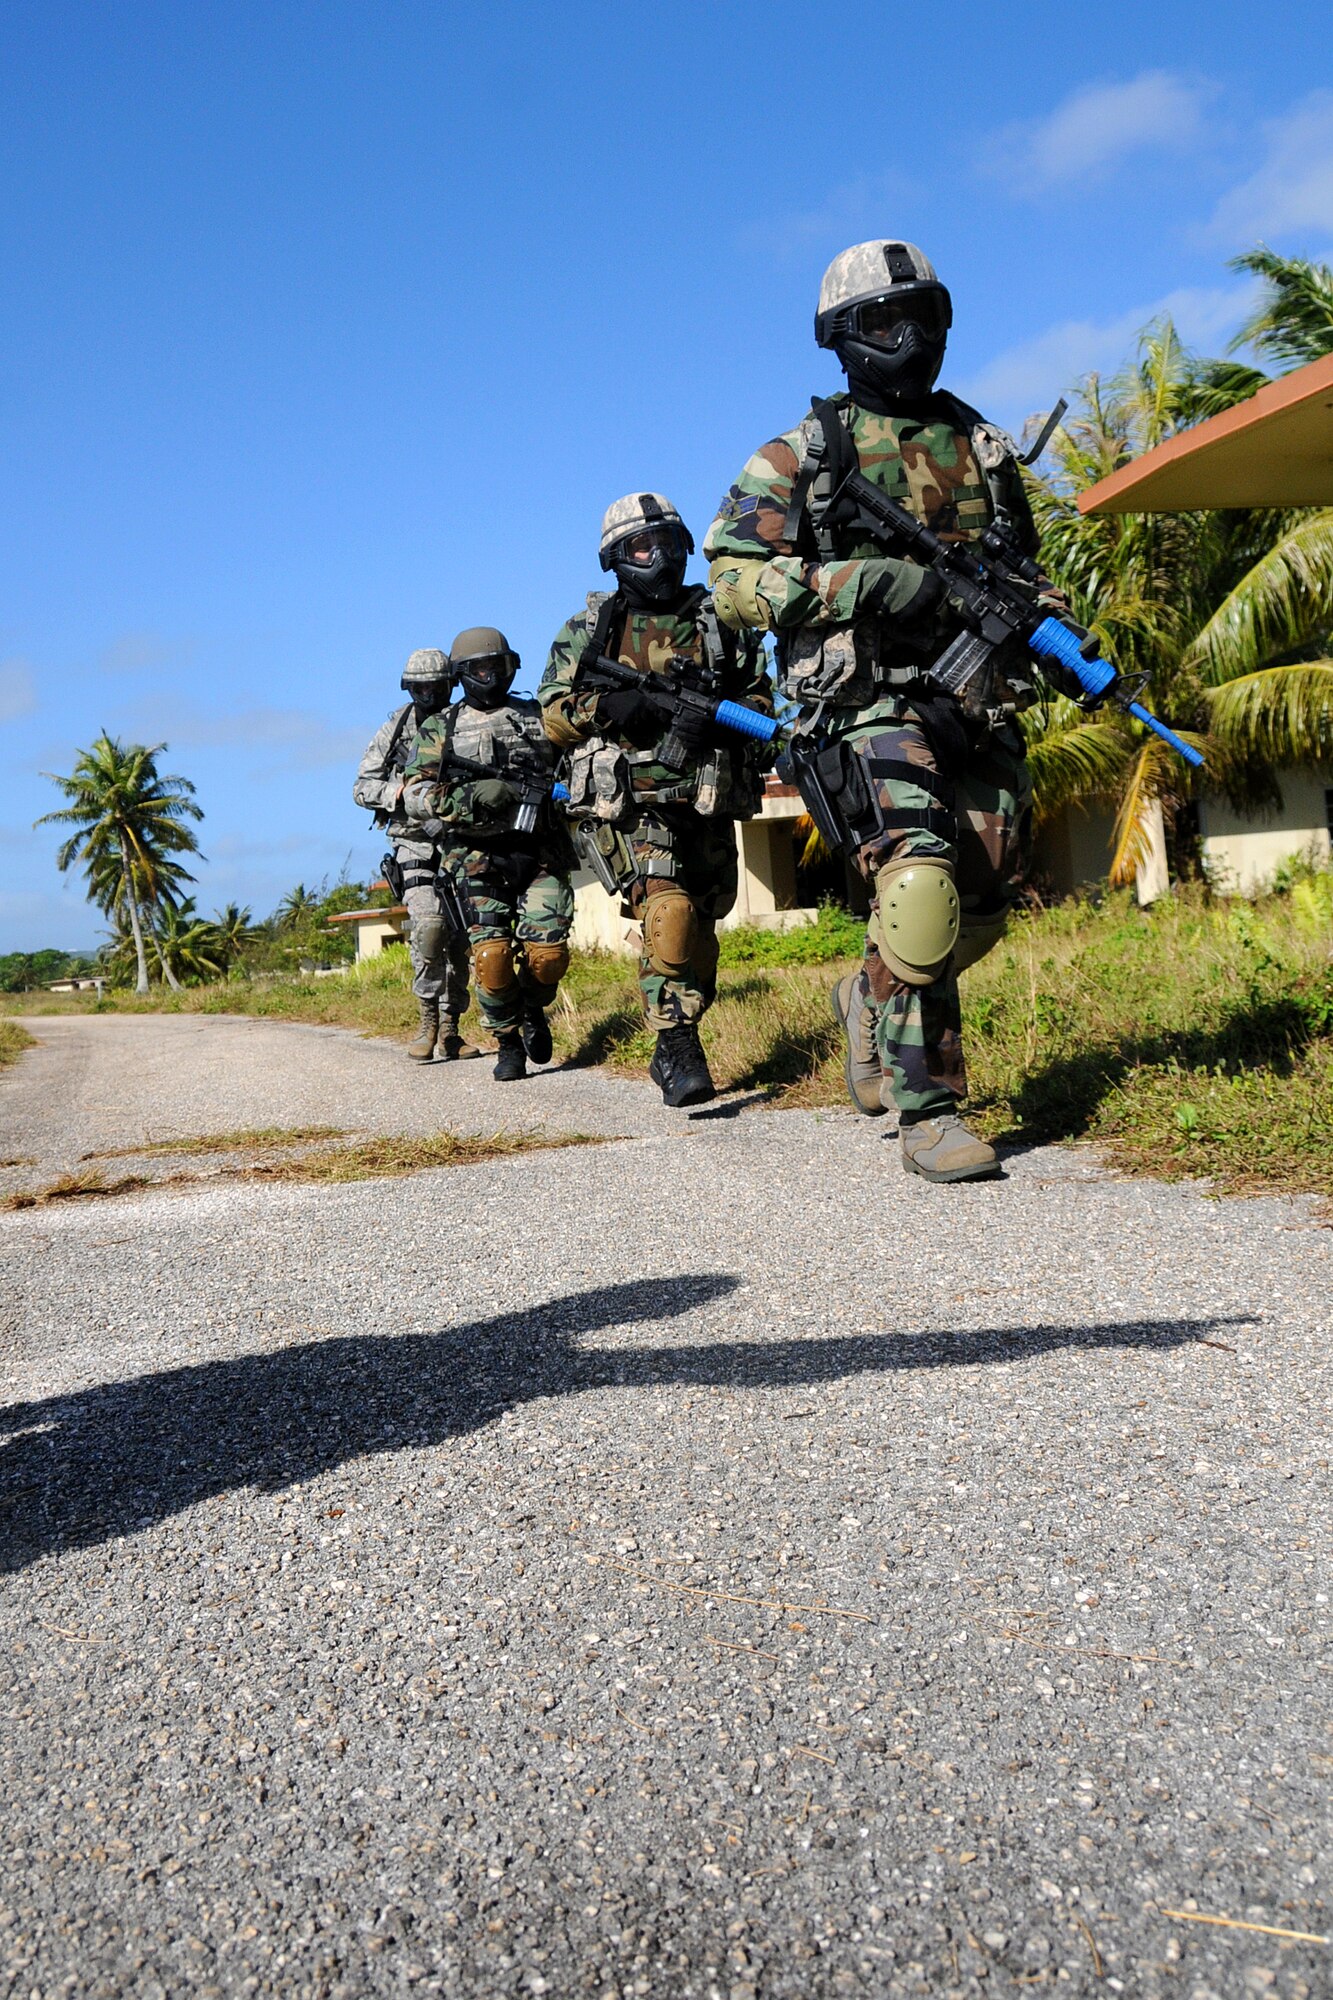 ANDERSEN AIR FORCE BASE, Guam - Commando Warrior Cadre Tech Sgt. Rudy Aguirre points the Kulis Air National Guard Security Forces members to the designated training area here during Commando Warrior Urban Operations exercise 09-1Jan. 31. The mission of the Regional Training Center of Commando Warrior is to enhance the combat readiness of PACAF forces through training and evaluation of force protection and ground combat skills. (U.S. Air Force photo by Airman 1st Class Courtney Witt)